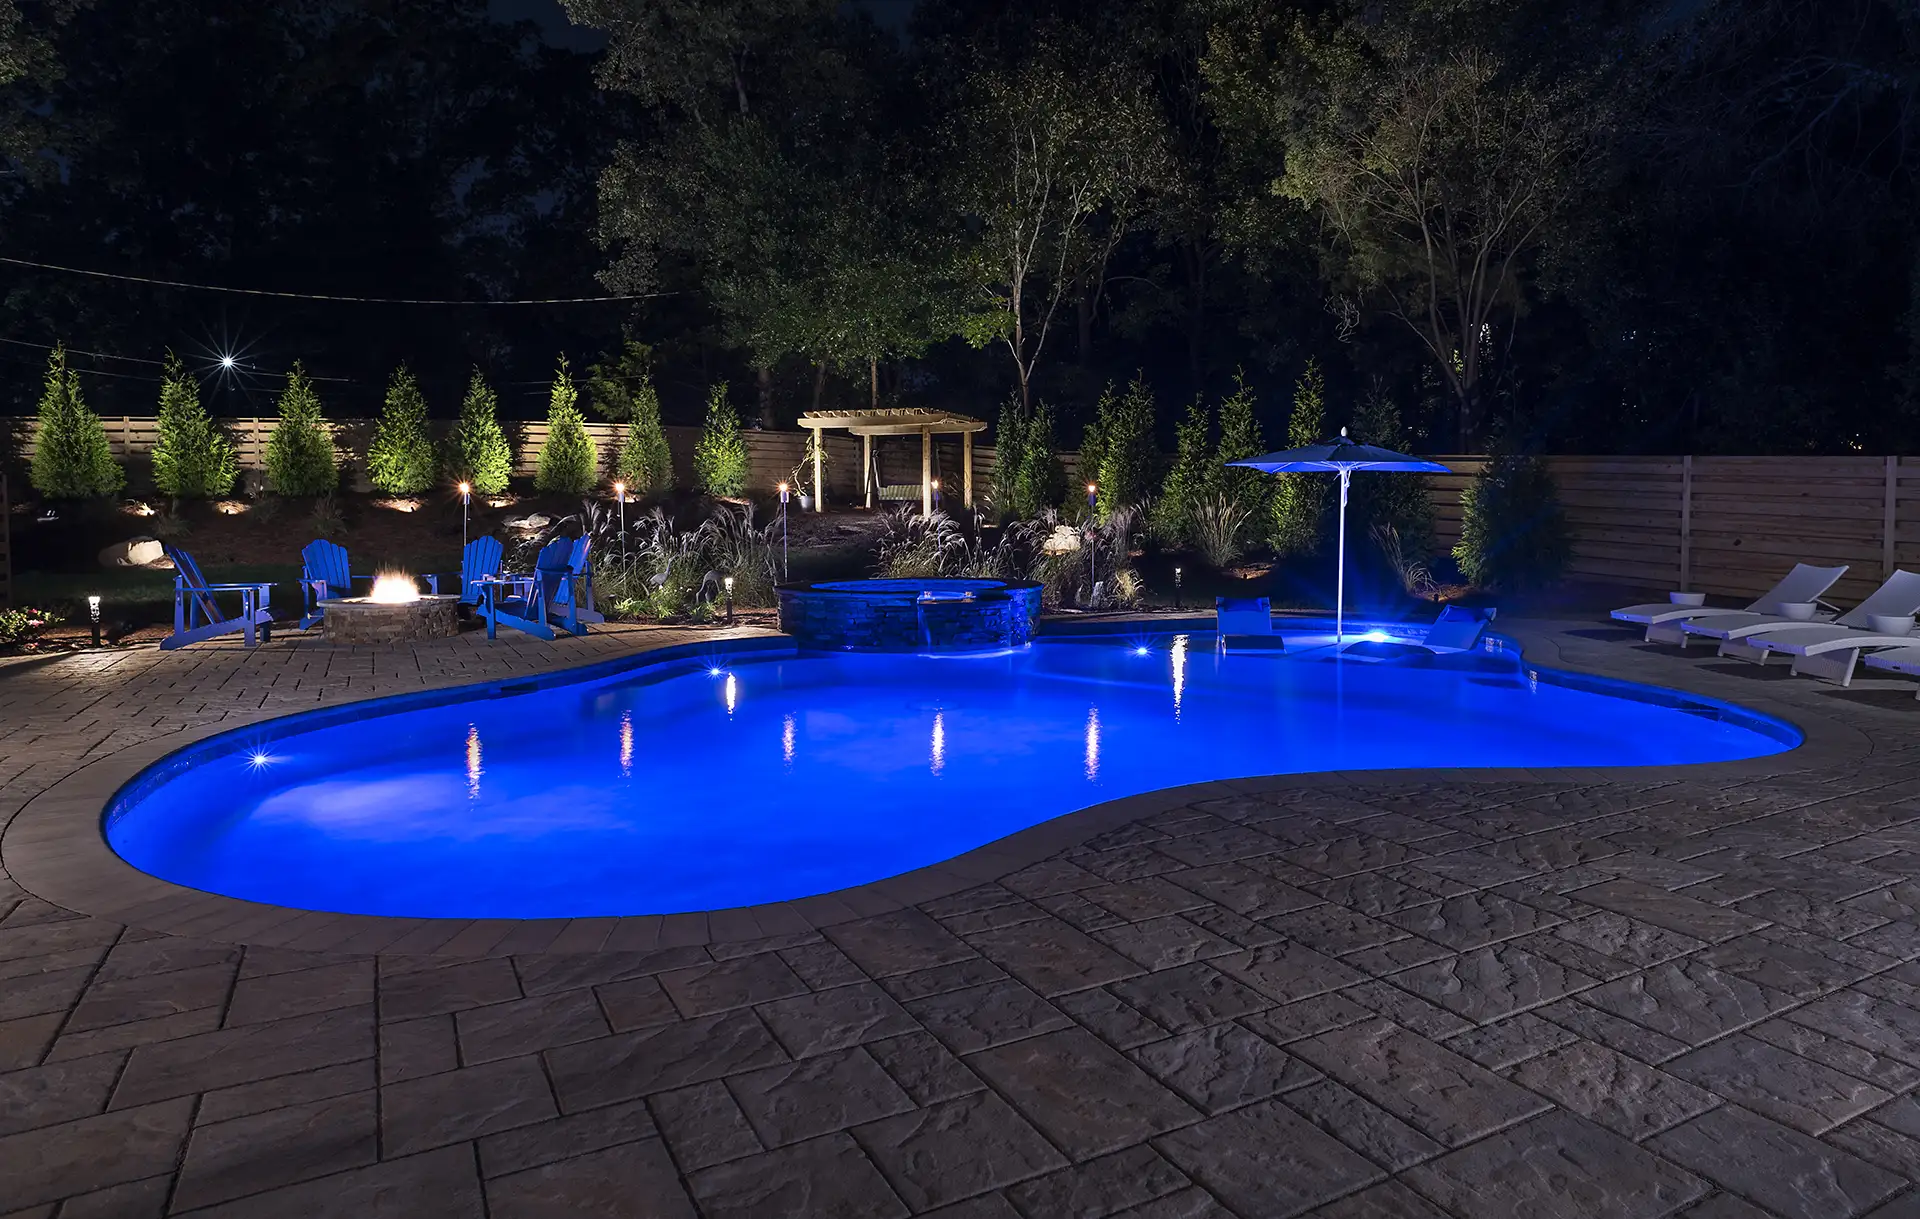 Raleigh Contemporary image 4 pool seating area Lighthouse Outdoor Lighting and Audio Greensboro NC